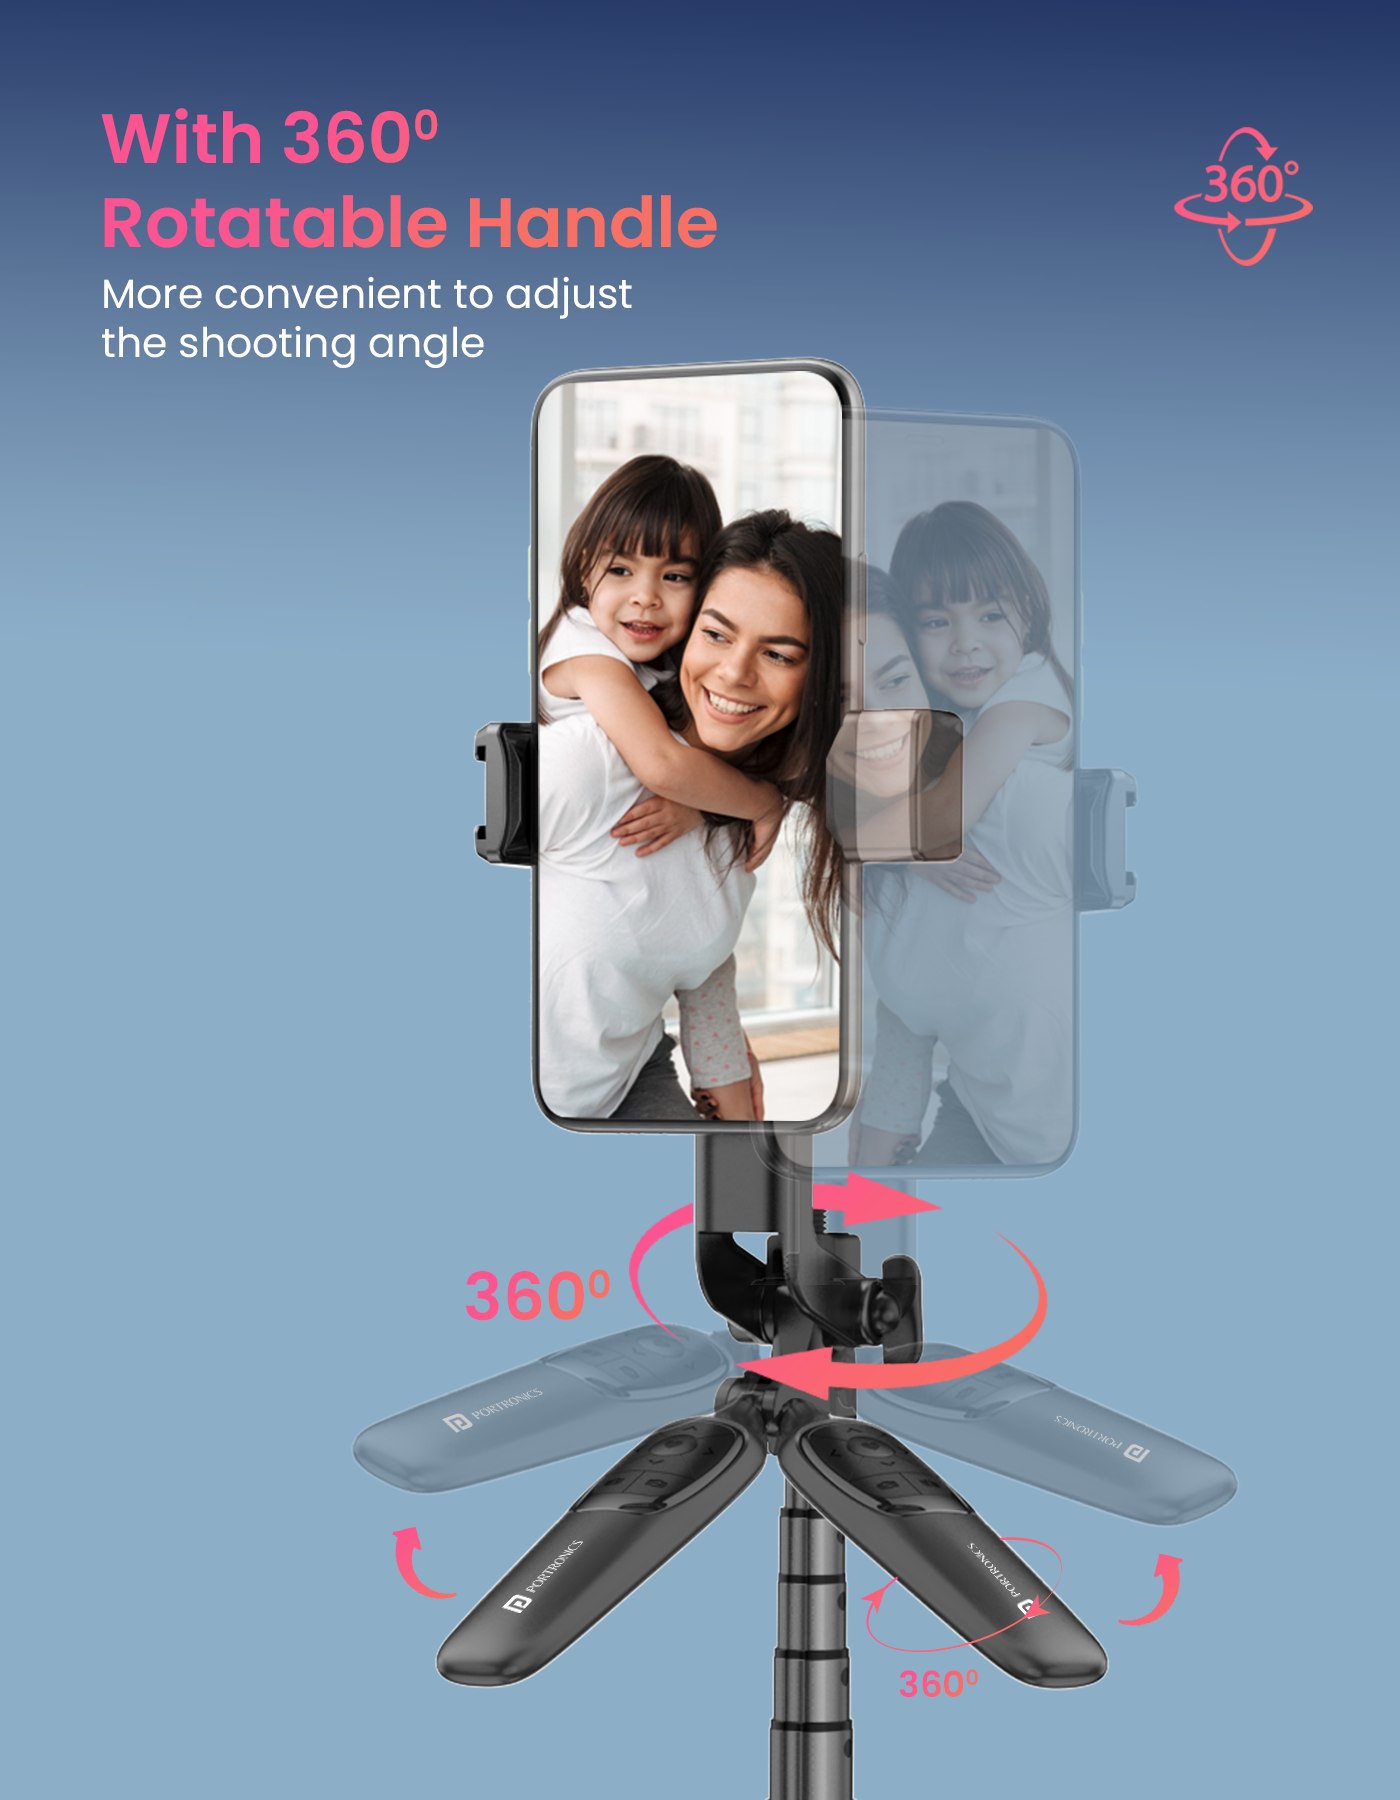 Portronics Lumistick - Smart Selfie Stick with umbrella tripod stand for more stable